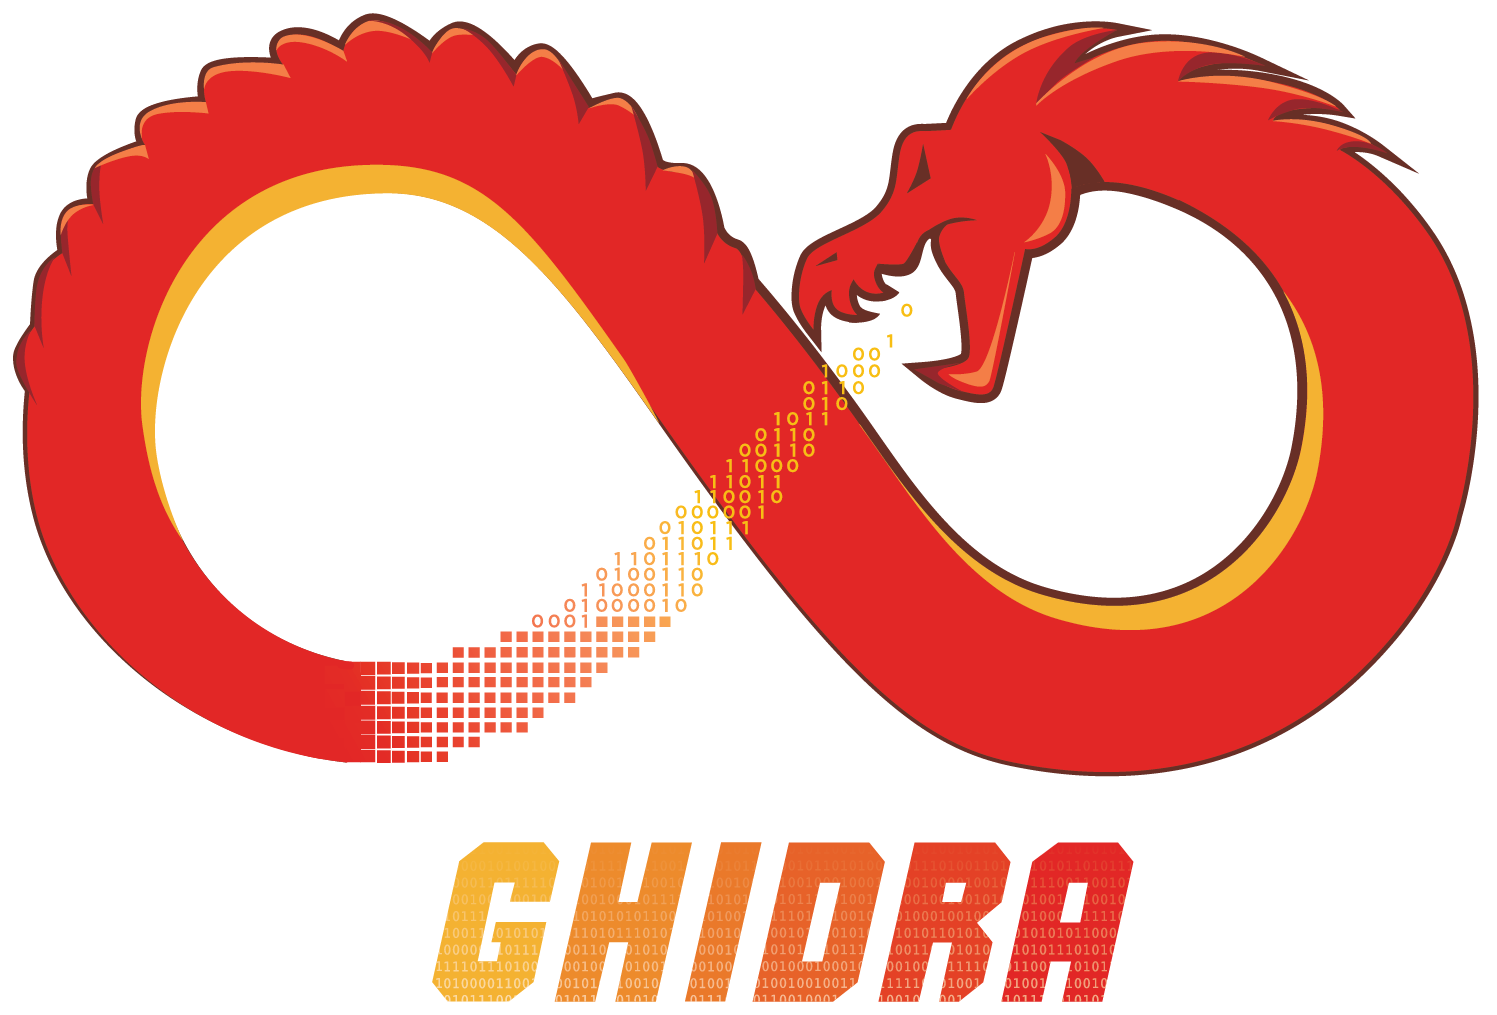 Ghidra: NSA’s reverse engineerin tool released to the public